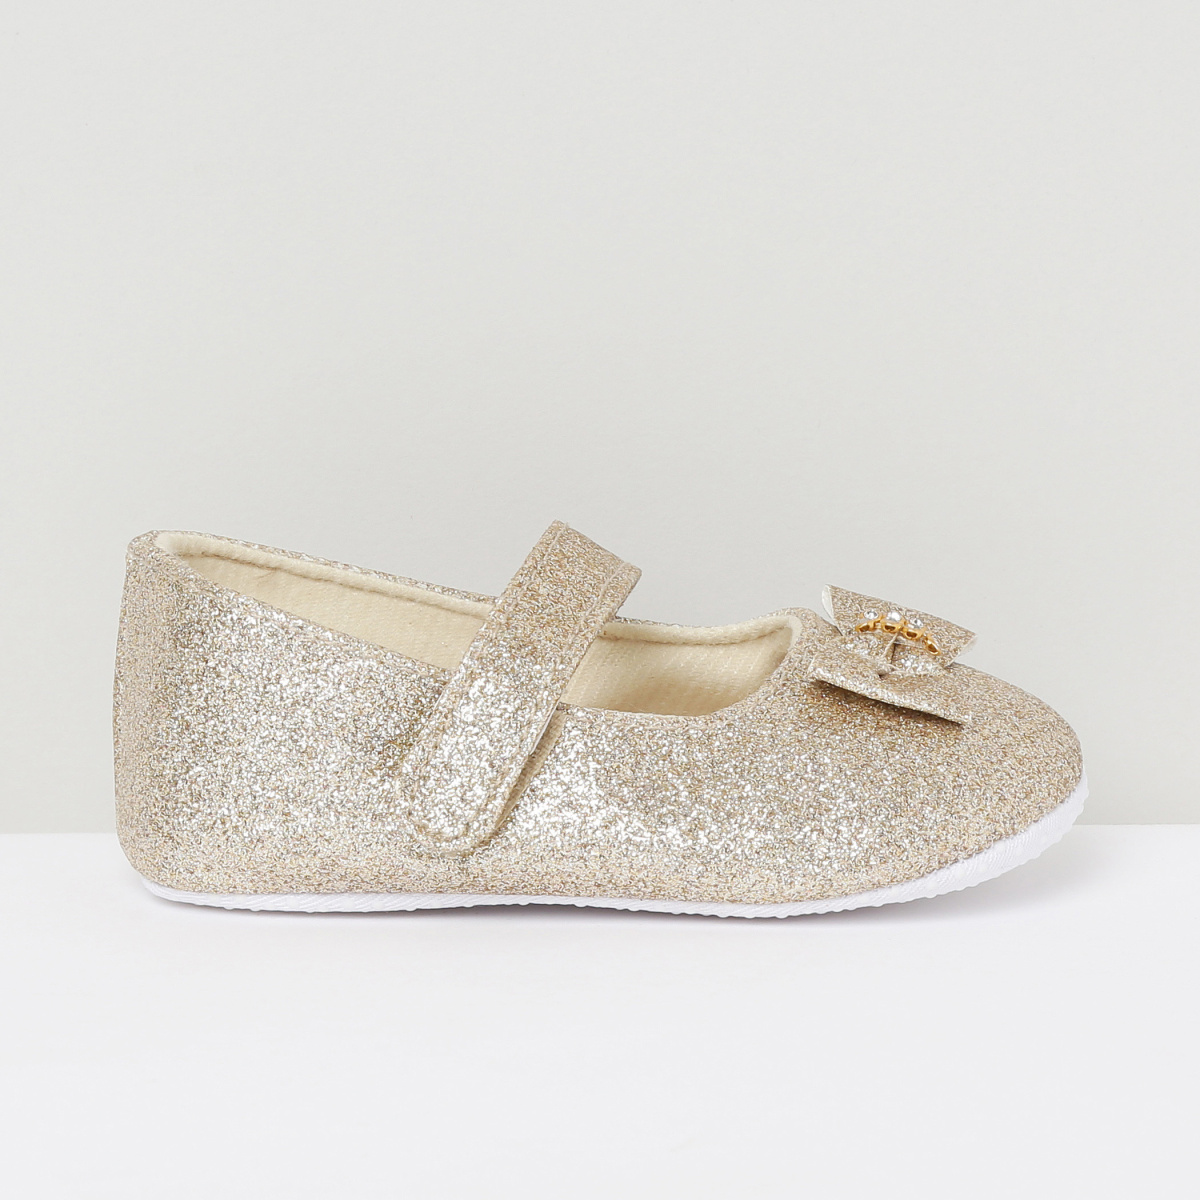 MAX Shimmery Mary Janes with Embellished Applique